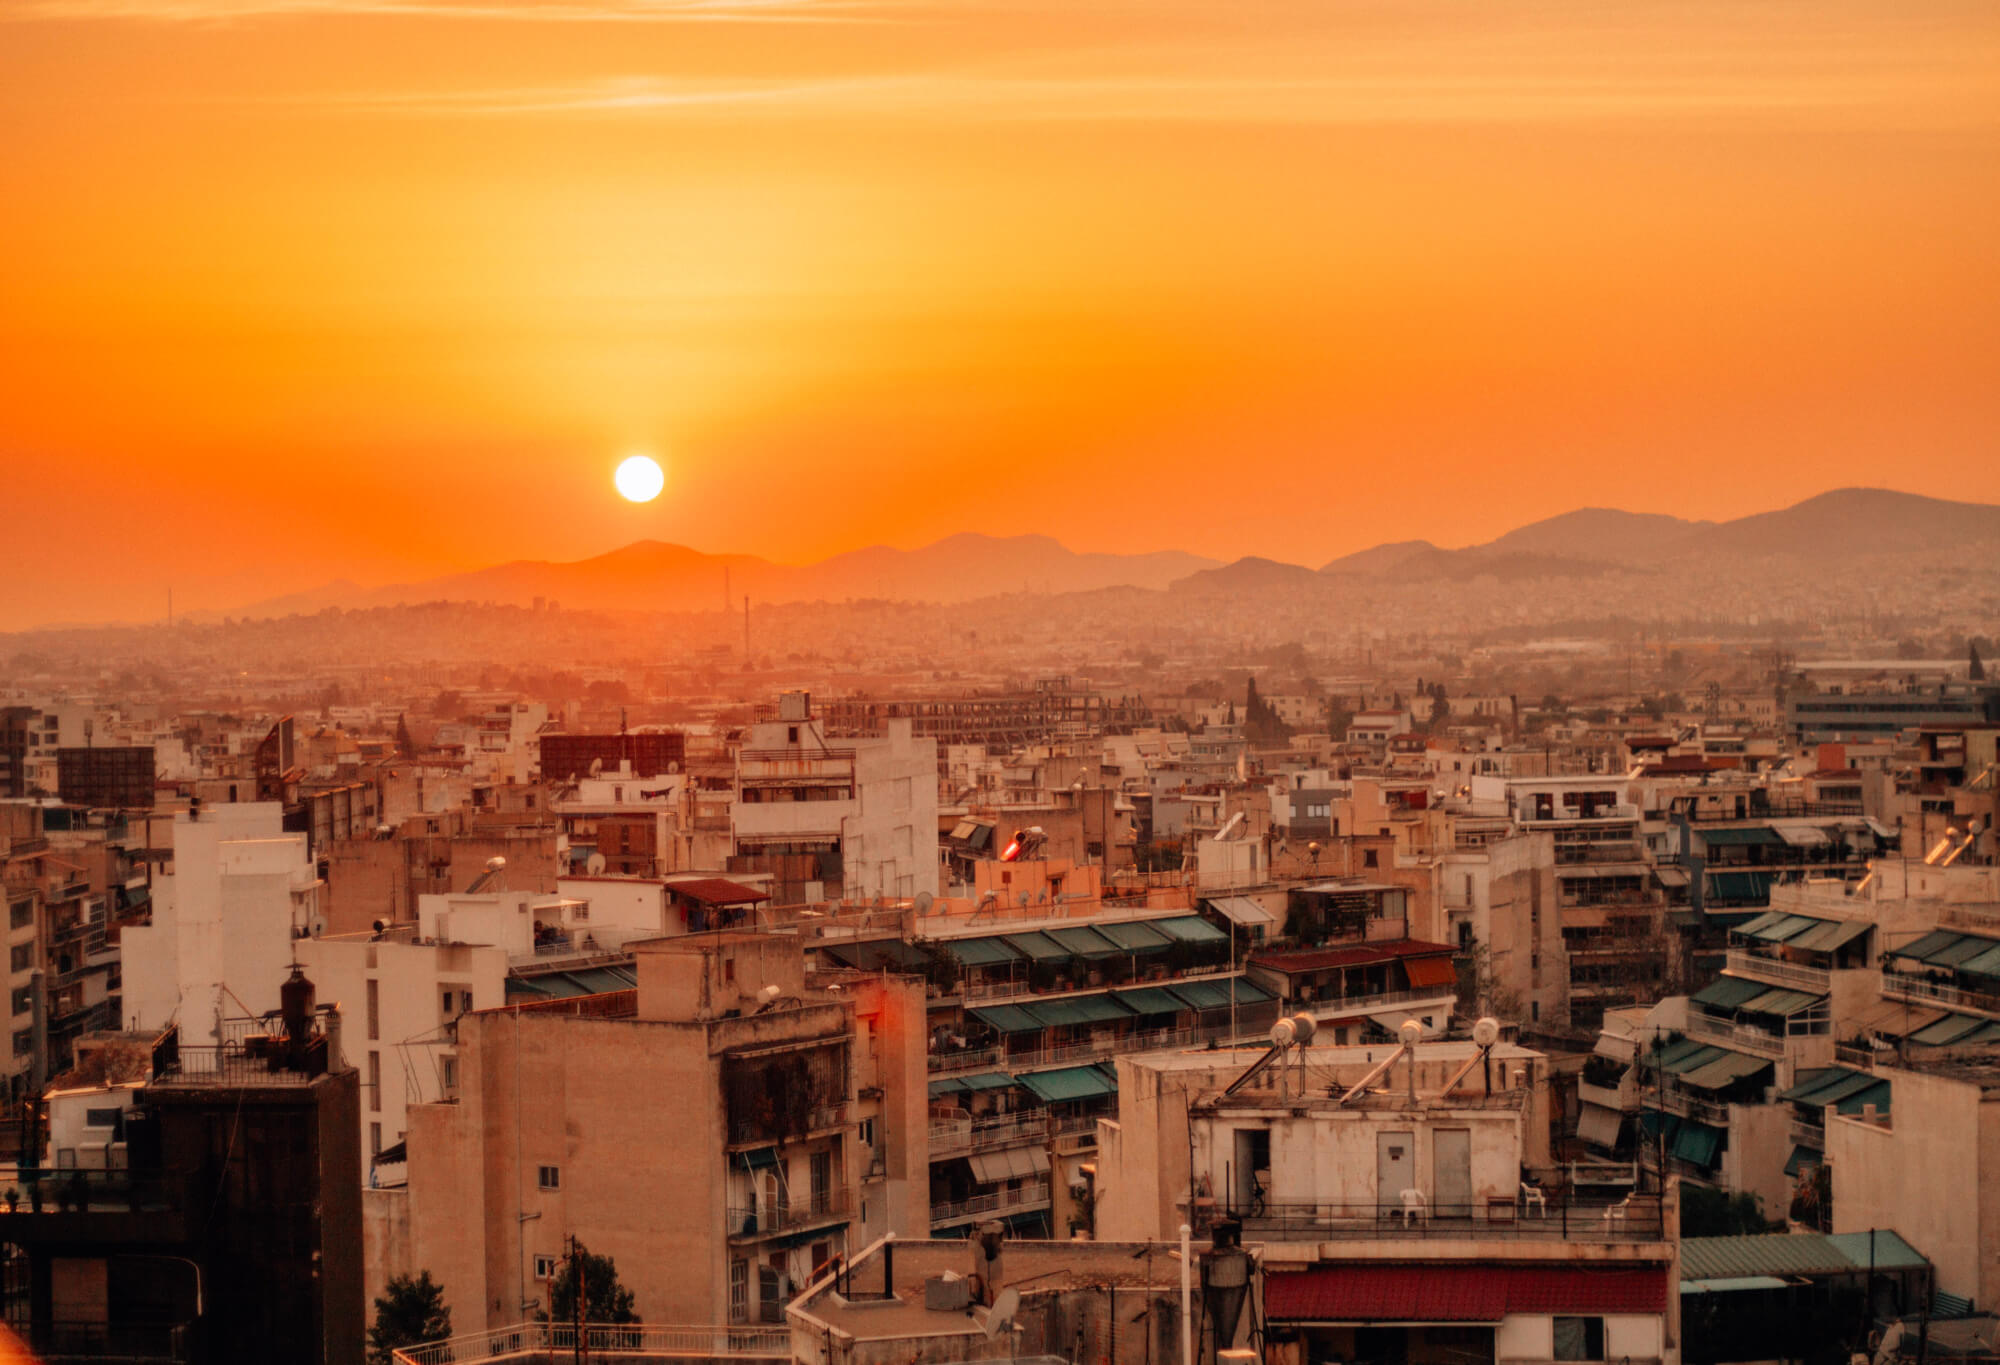 Prepared to be dazzled by wonderful sunsets as you explore Athens in 3 days!